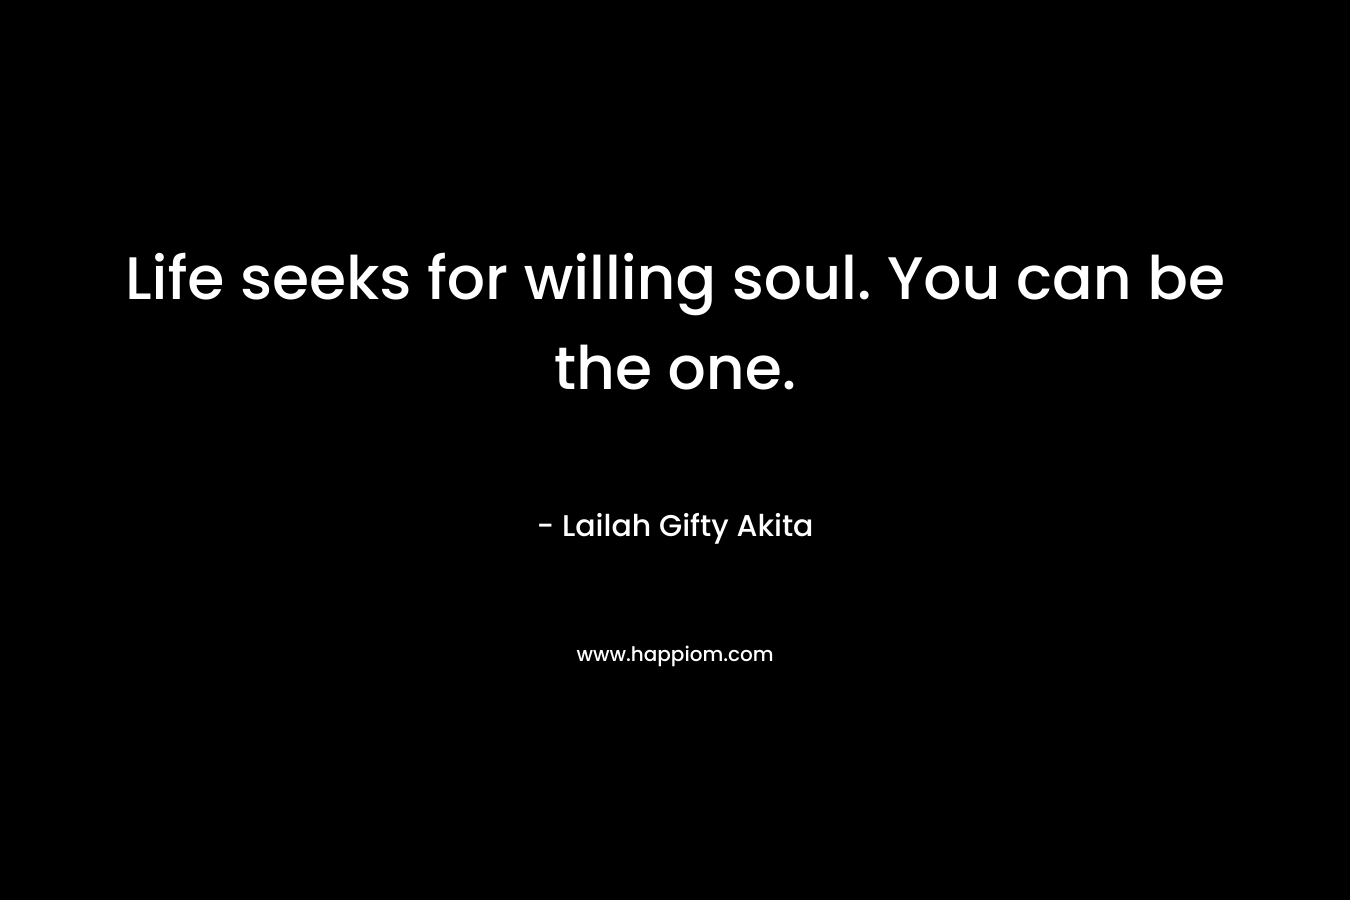 Life seeks for willing soul. You can be the one.